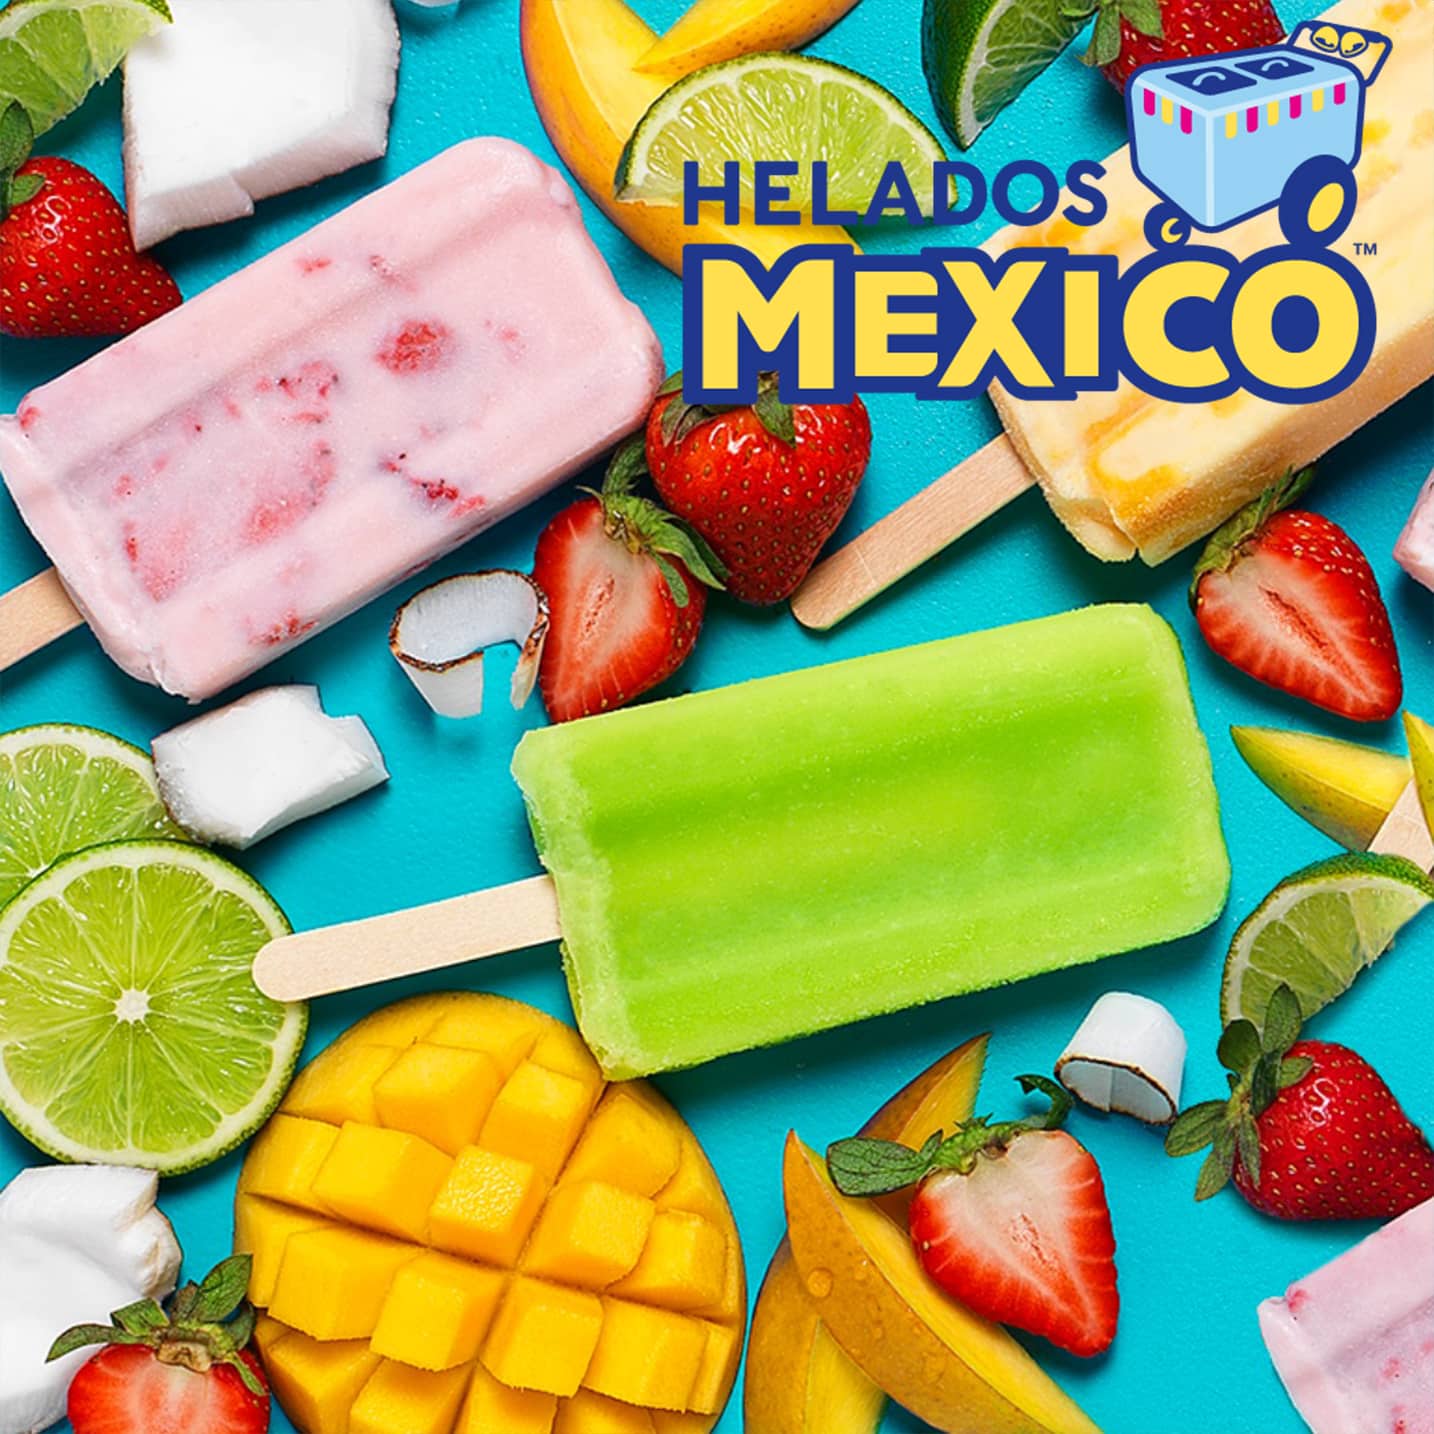 helados multipack and impulse paleta ice cream bars mexico from wholesale distriubtor transcold distribution